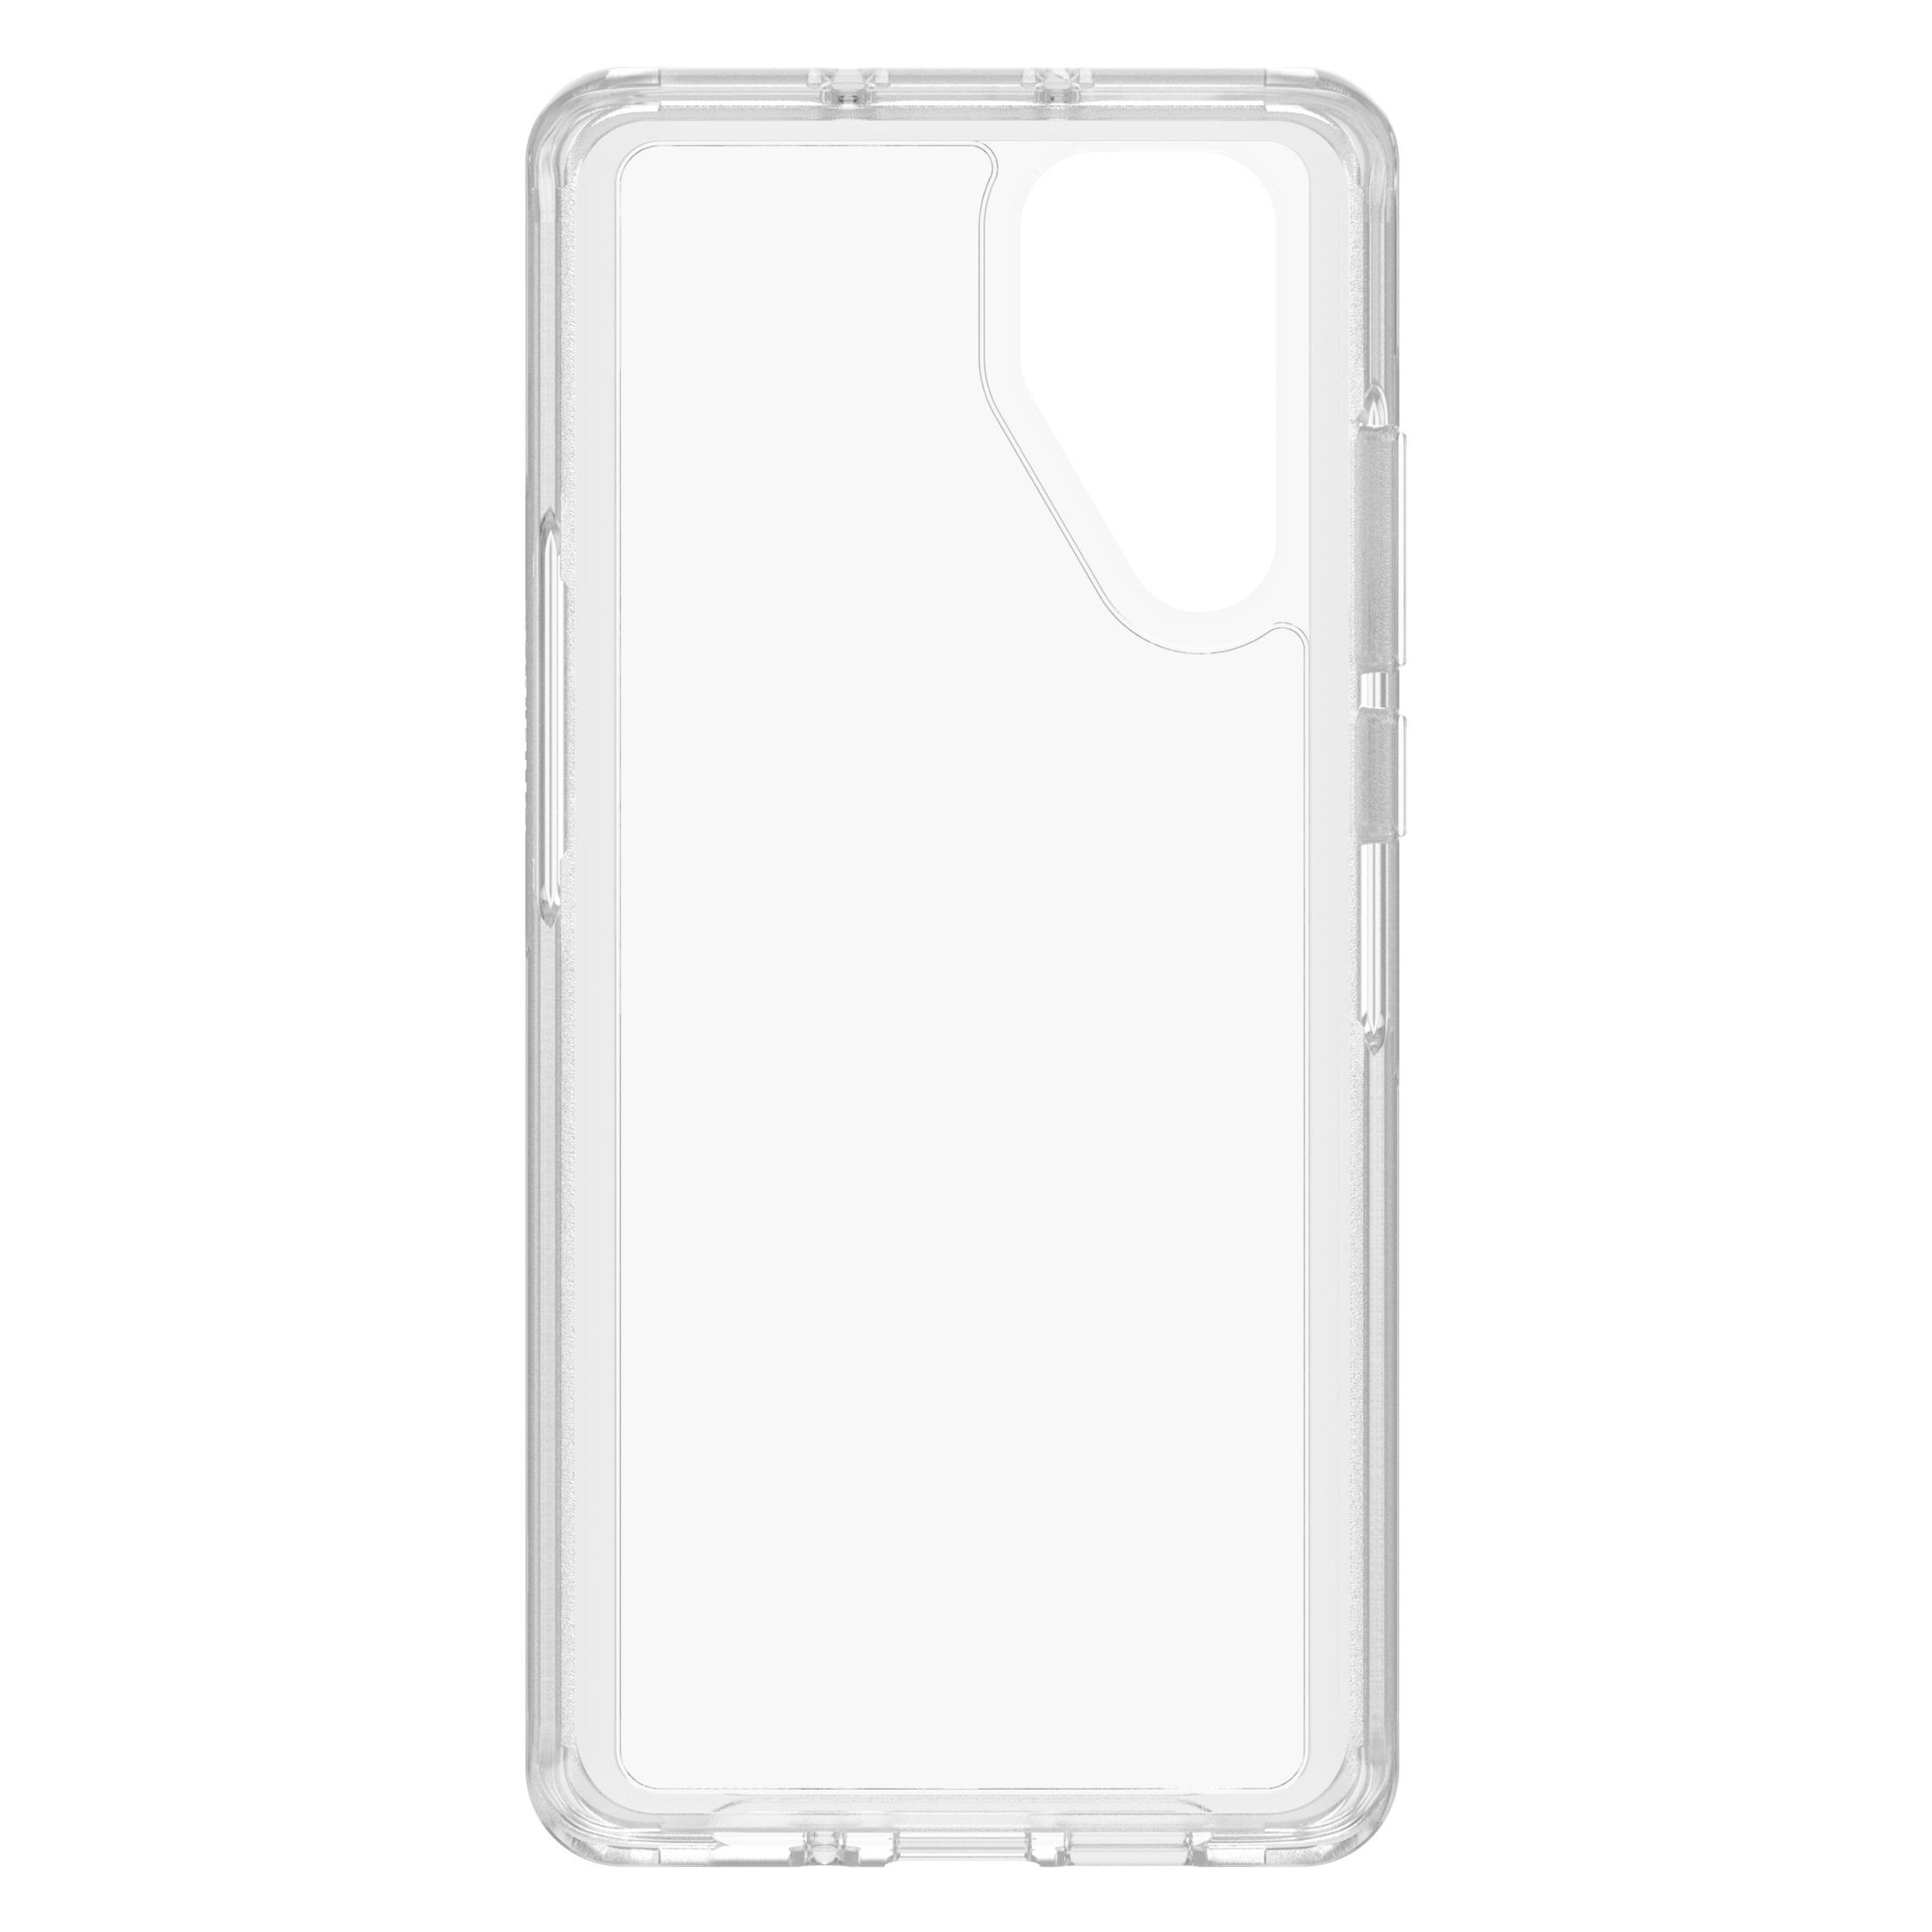 Pro, P30PRO OTTERBOX Transparent CLEAR, SYMMETRY Backcover, P30 Huawei, 77-61988